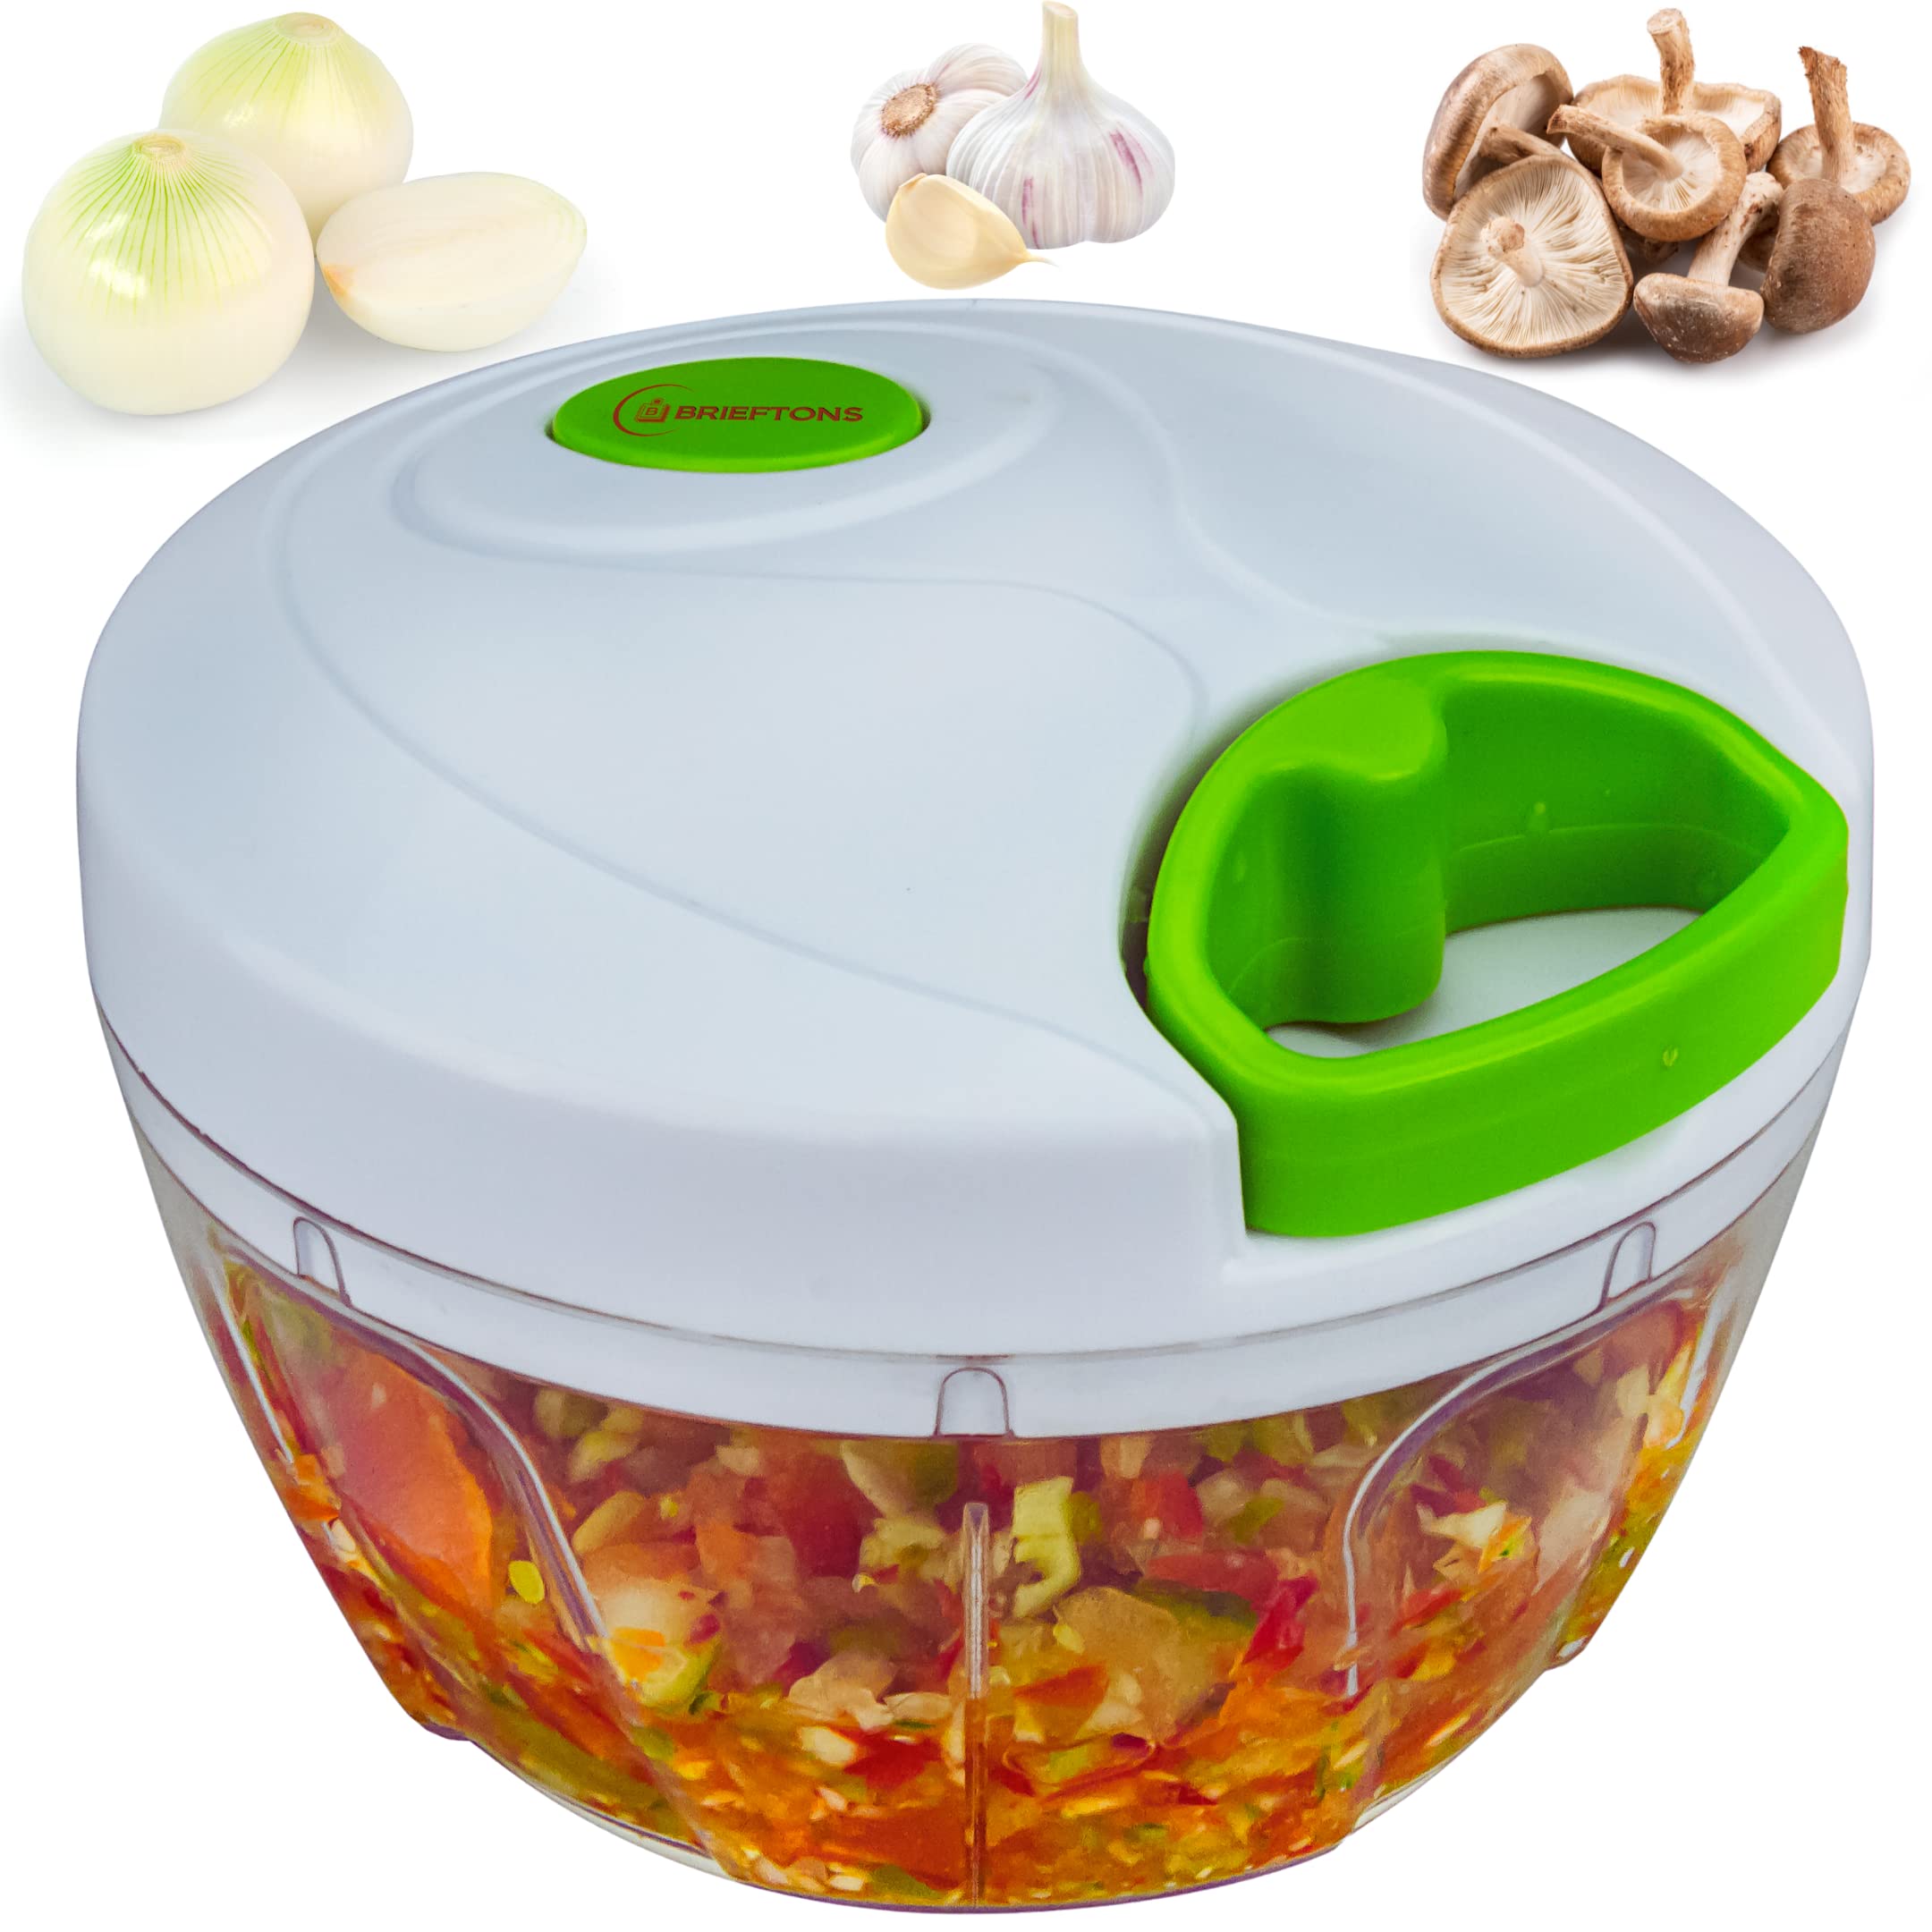 Brieftons Manual Food chopper, compact & Powerful Hand Pull chopper Blender to chop Onion, garlic, Vegetables, Fruits, Herbs for